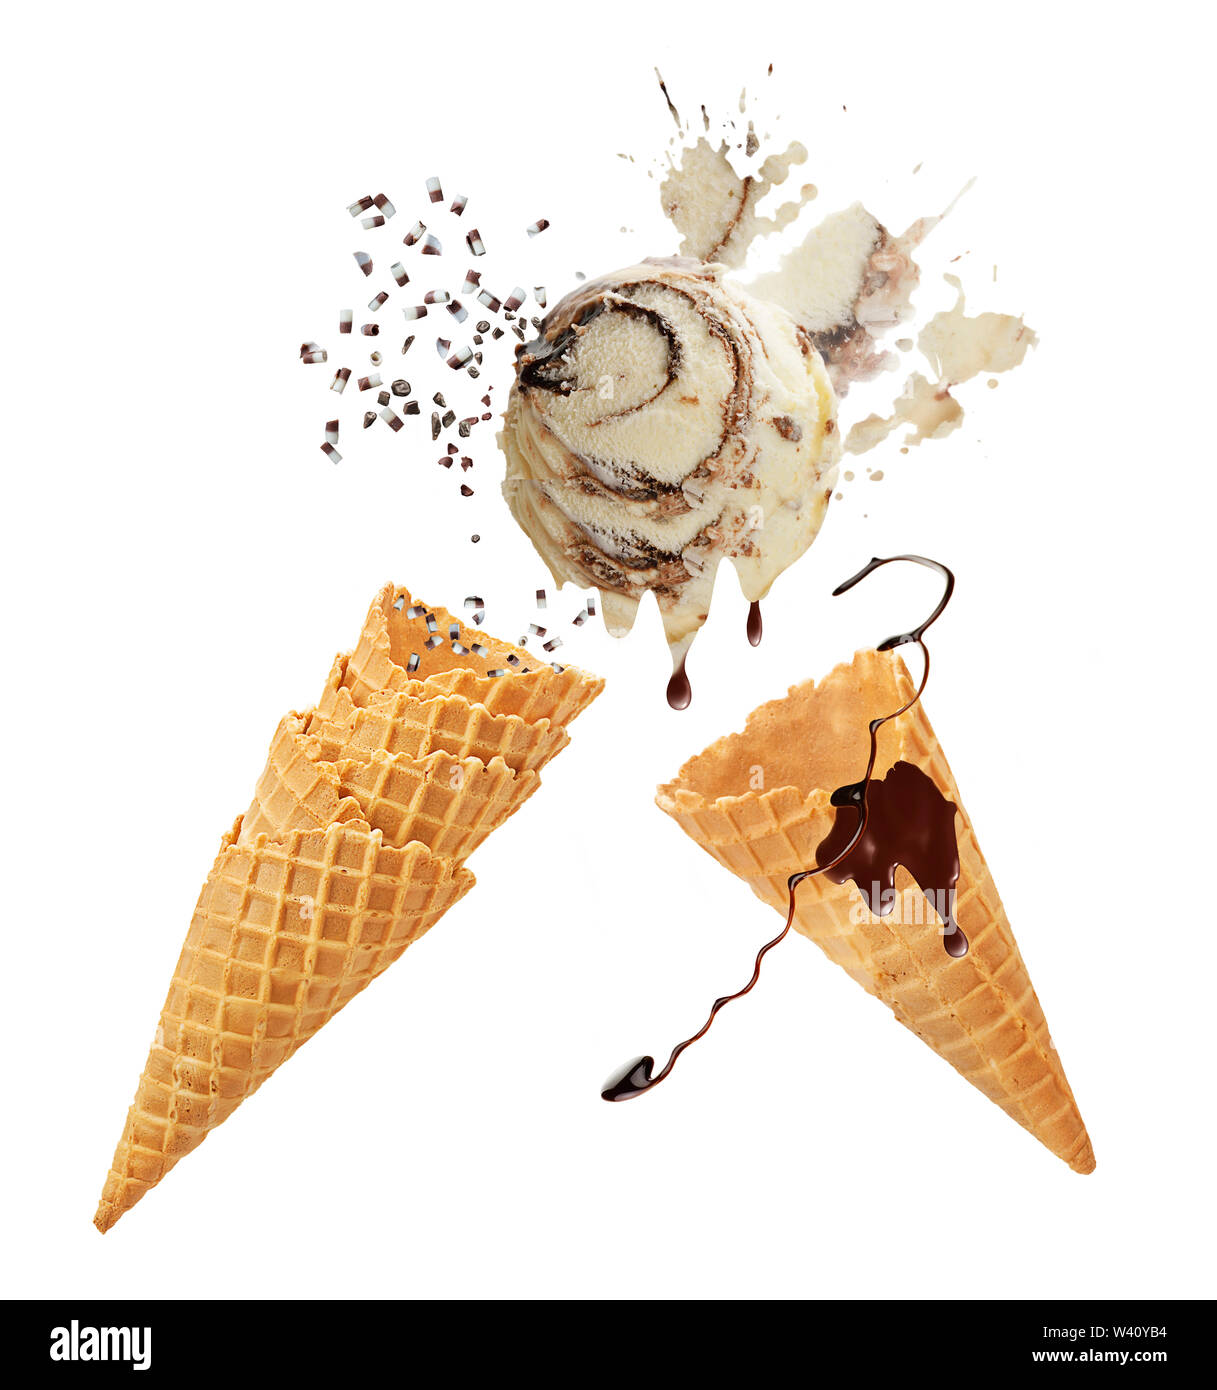 Vanilla and chocolate ice cream with waffle cones isolated on white background. Stock Photo